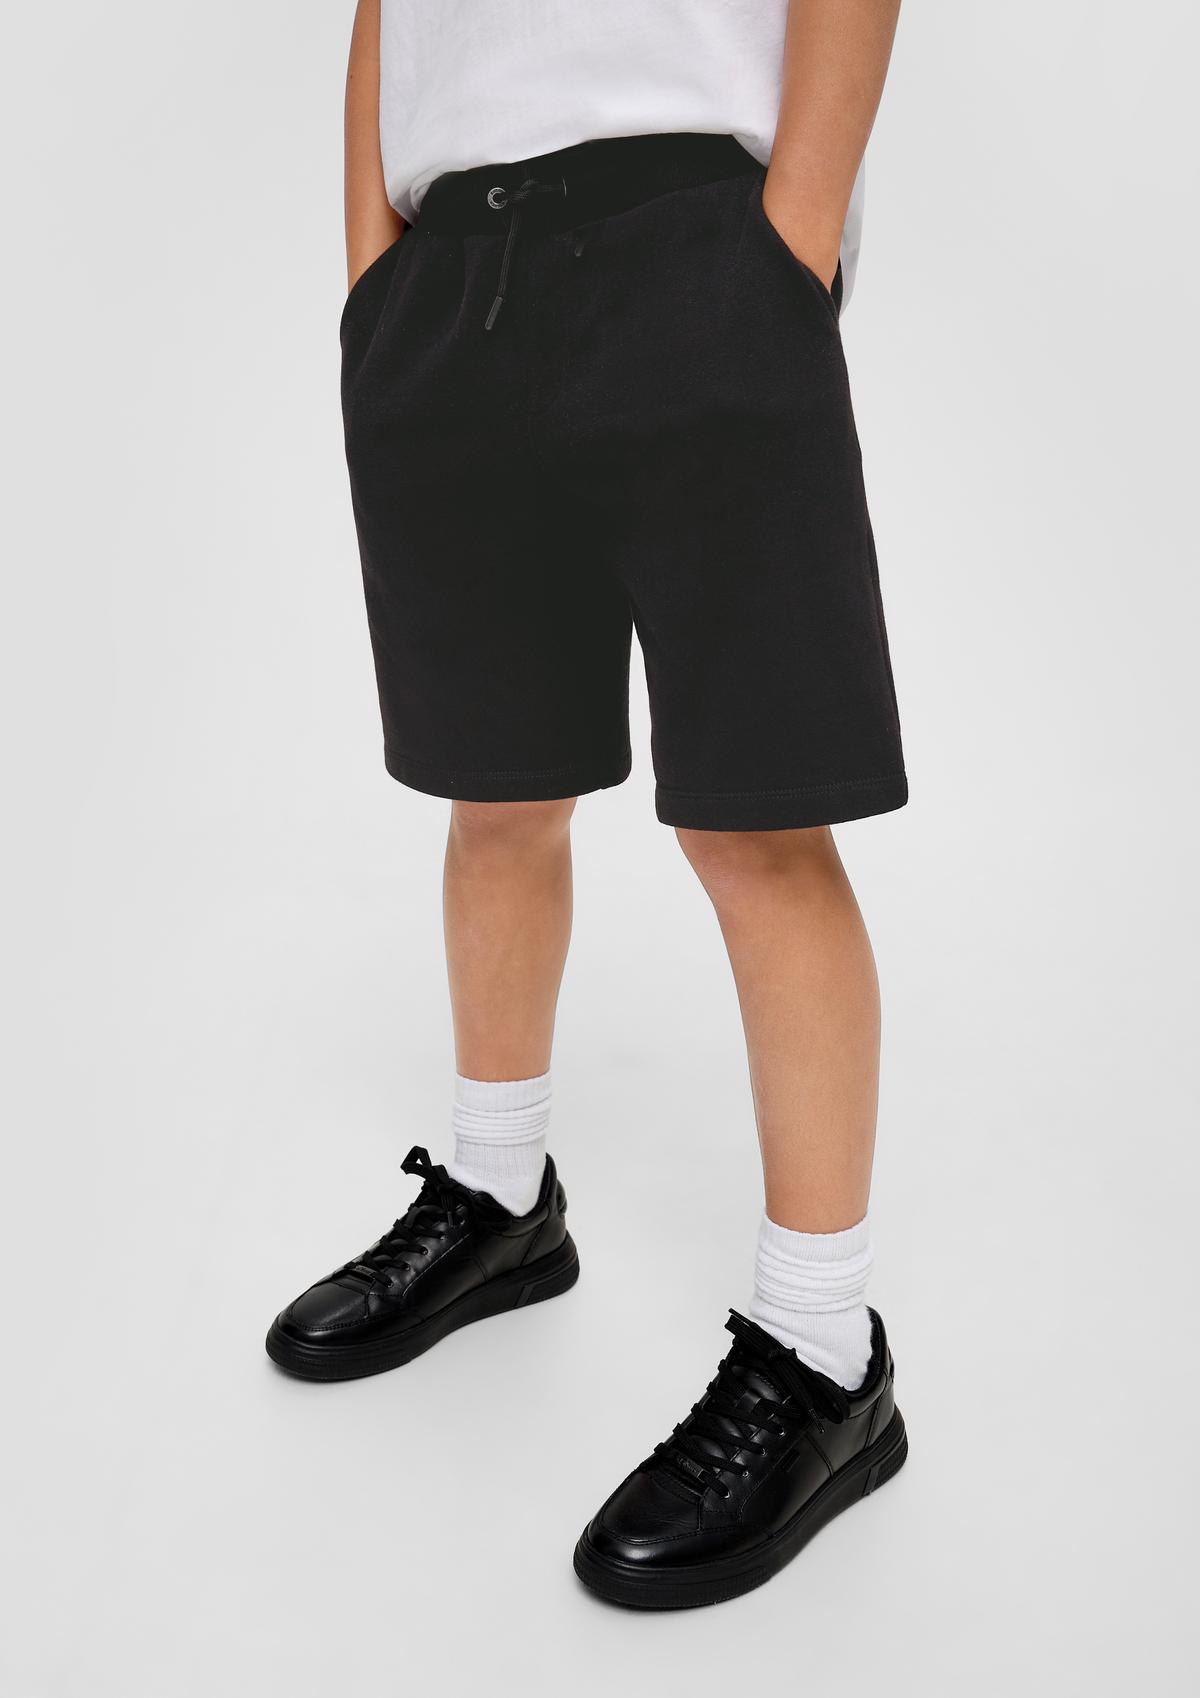 Find Bermuda teens boys shorts for and online